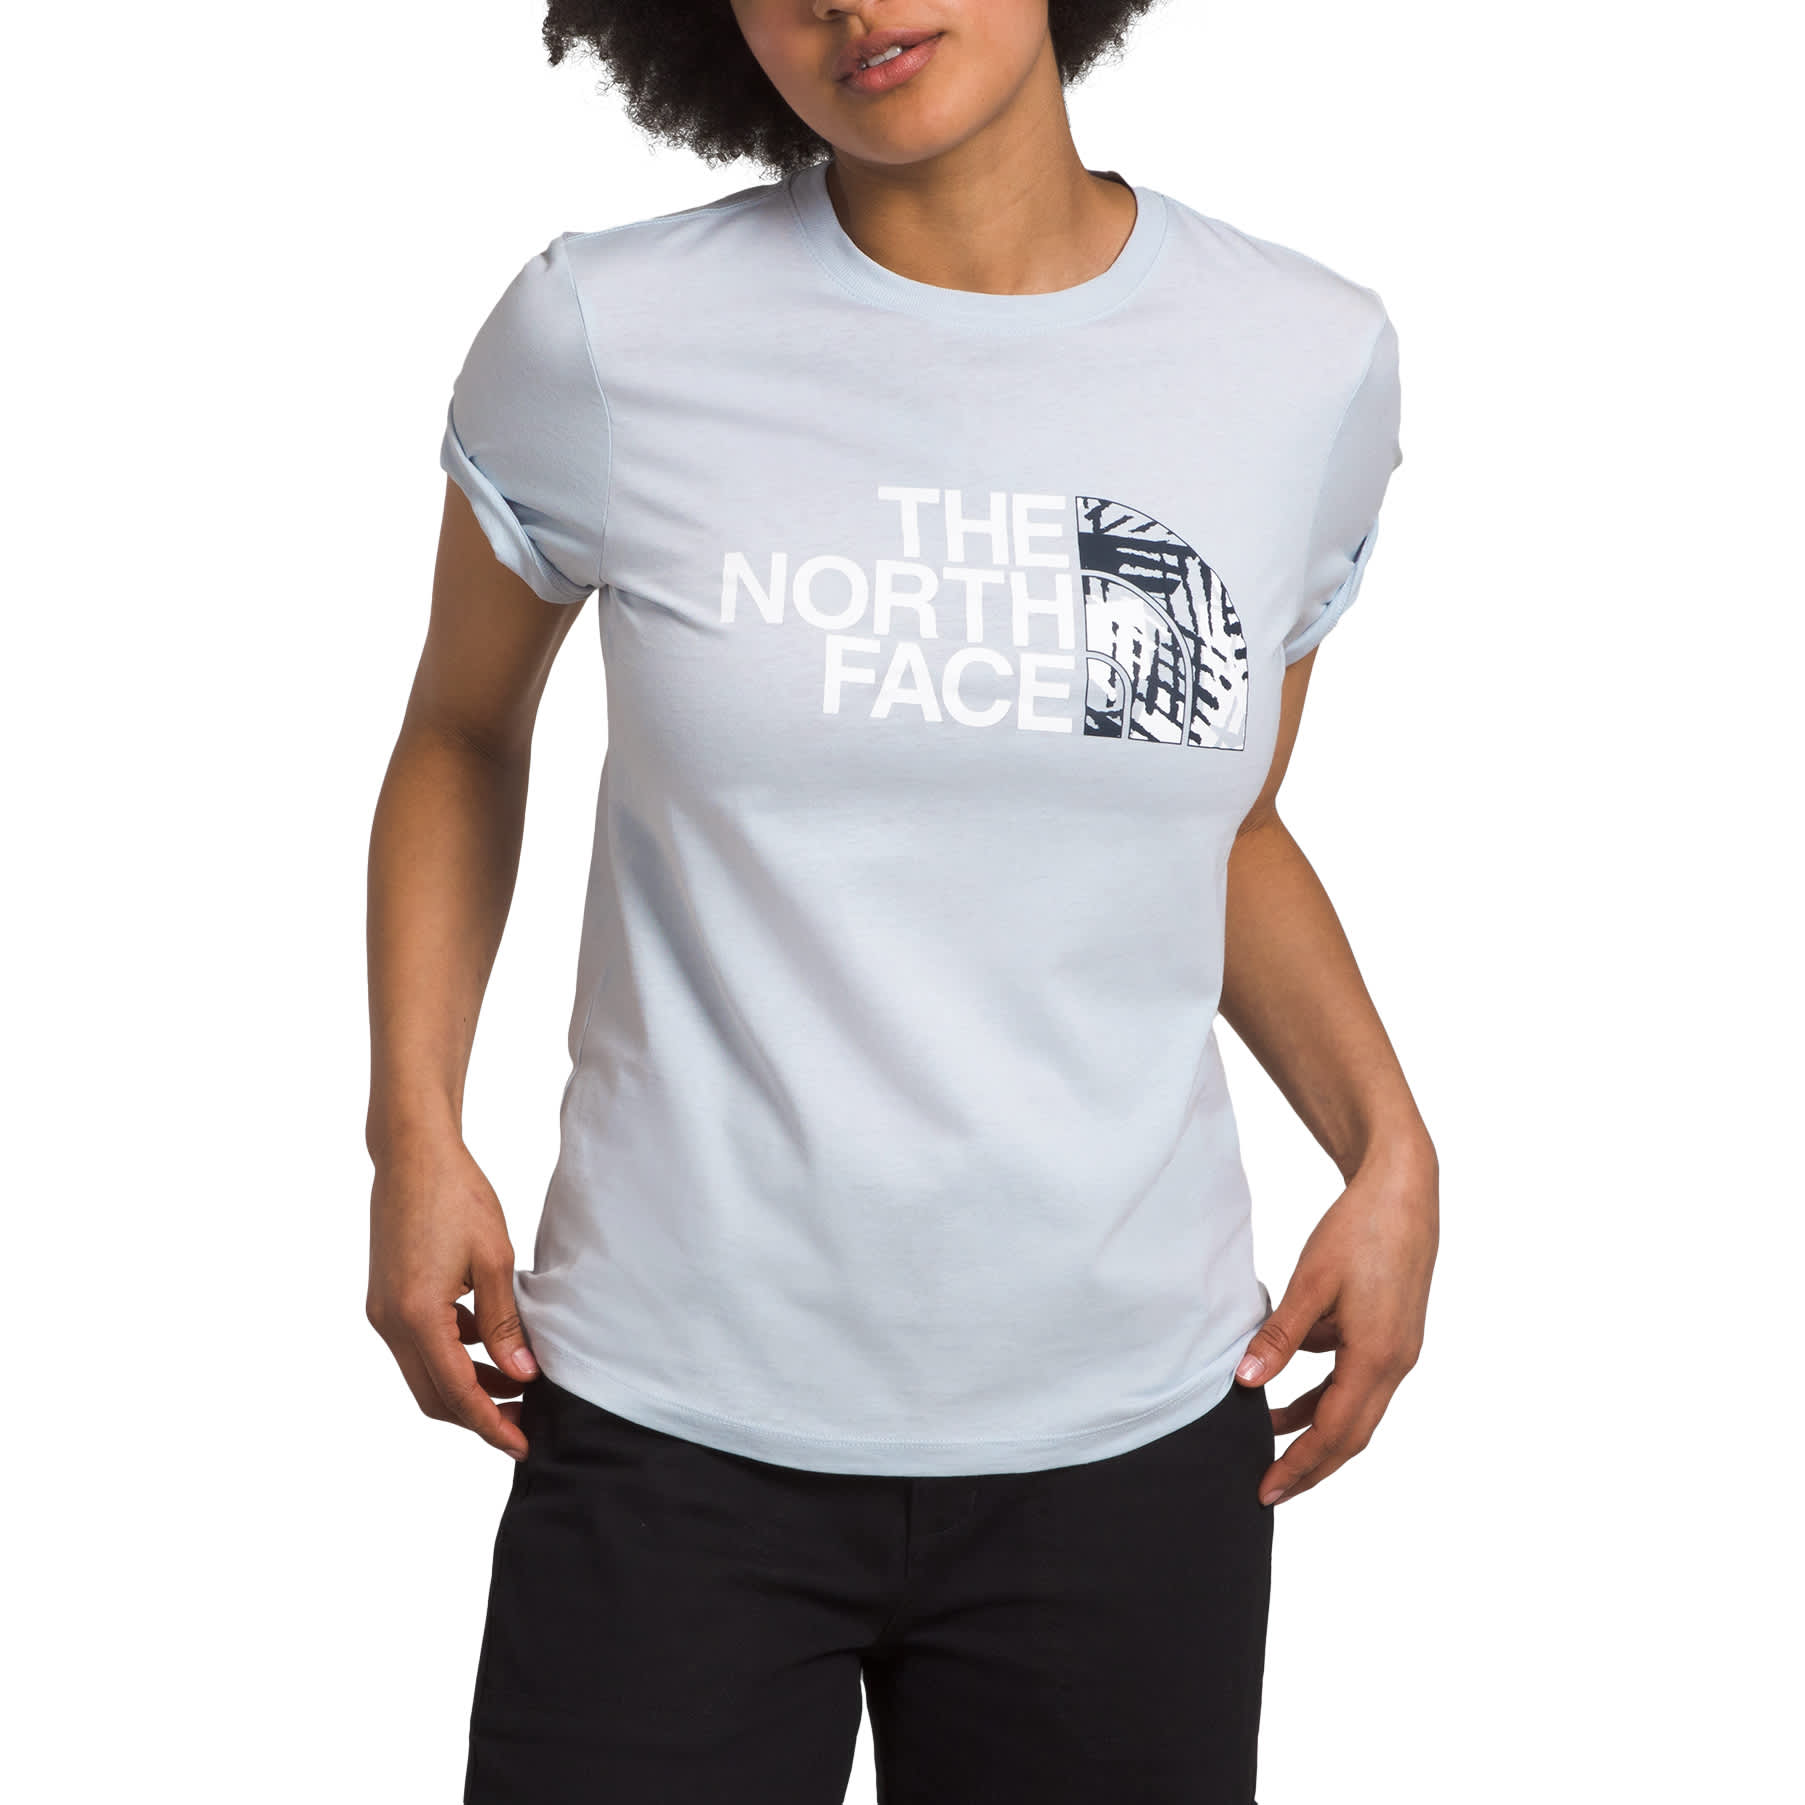 The North Face® Women’s Half Dome Short Sleeve T-Shirt